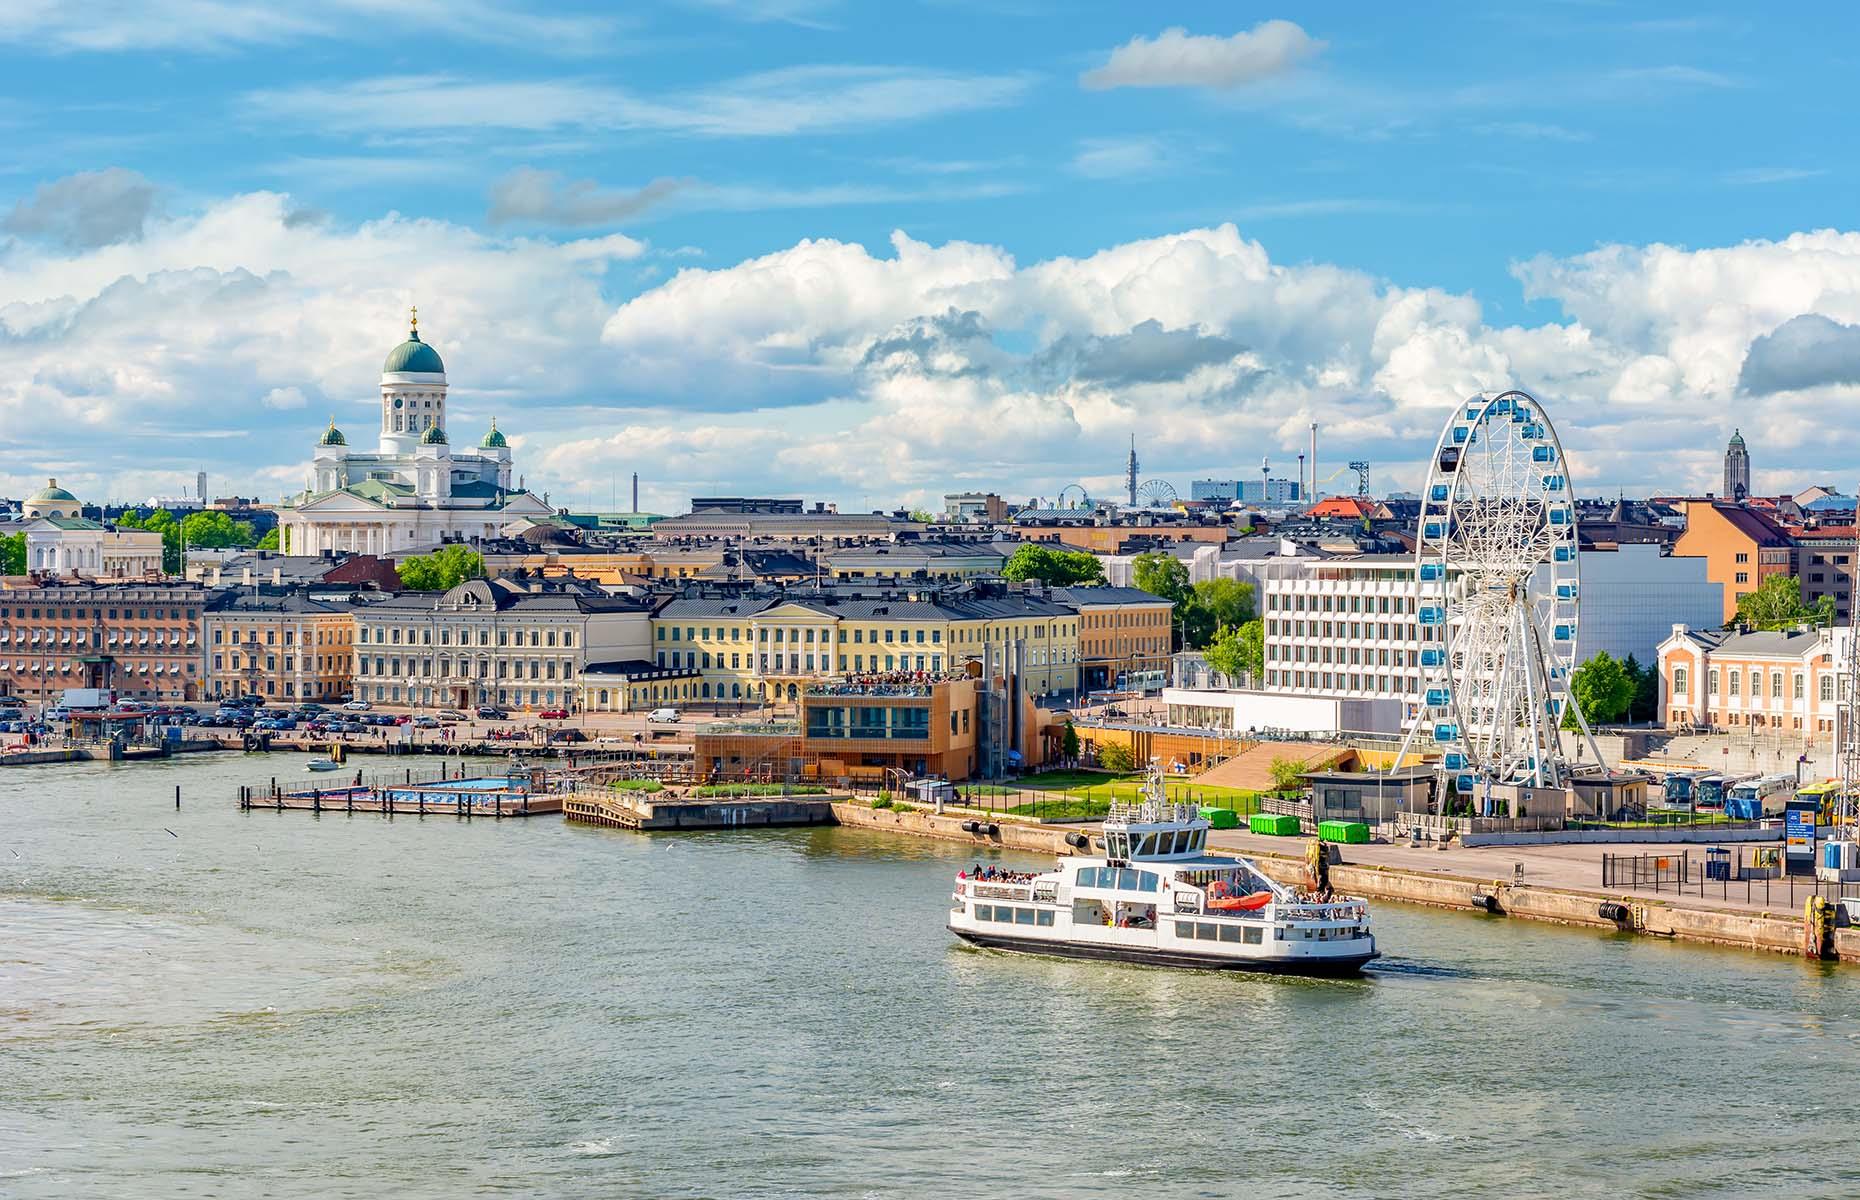 <p>Stockholm and Copenhagen tend to overshadow Helsinki when it comes to Nordic city breaks, but this cool capital has plenty to offer. Great museums, striking buildings (like <a href="https://www.finlandiatalo.fi/en/">Finlandia Hall</a> overlooking Töölönlahti Bay and Sibelius Monument), cool boutiques and hip designer hotels make Finland's capital a more-than-worthy contender. There's a pretty harbourside area, the UNESCO-listed island fortress of <a href="https://www.suomenlinna.fi/en/">Suomenlinna</a>, a fantastic food scene and a plethora of saunas too.</p>